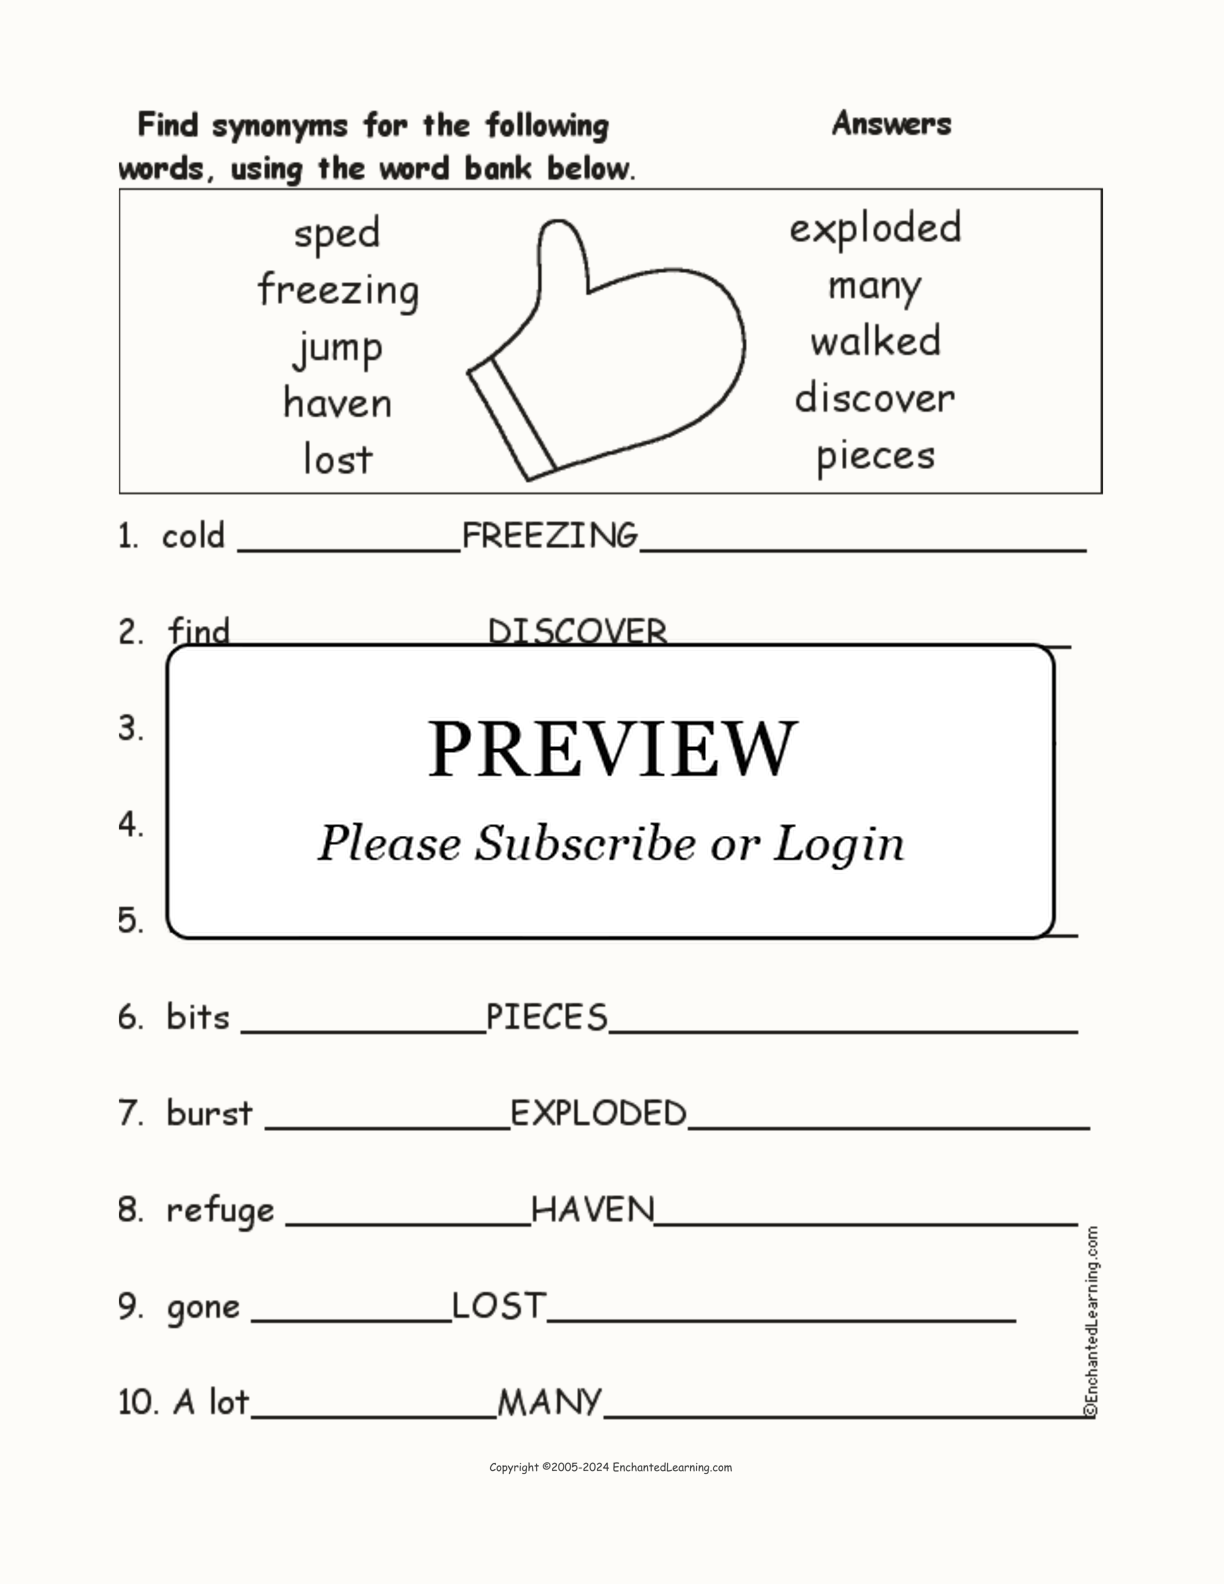 'The Mitten' Synonyms interactive worksheet page 2